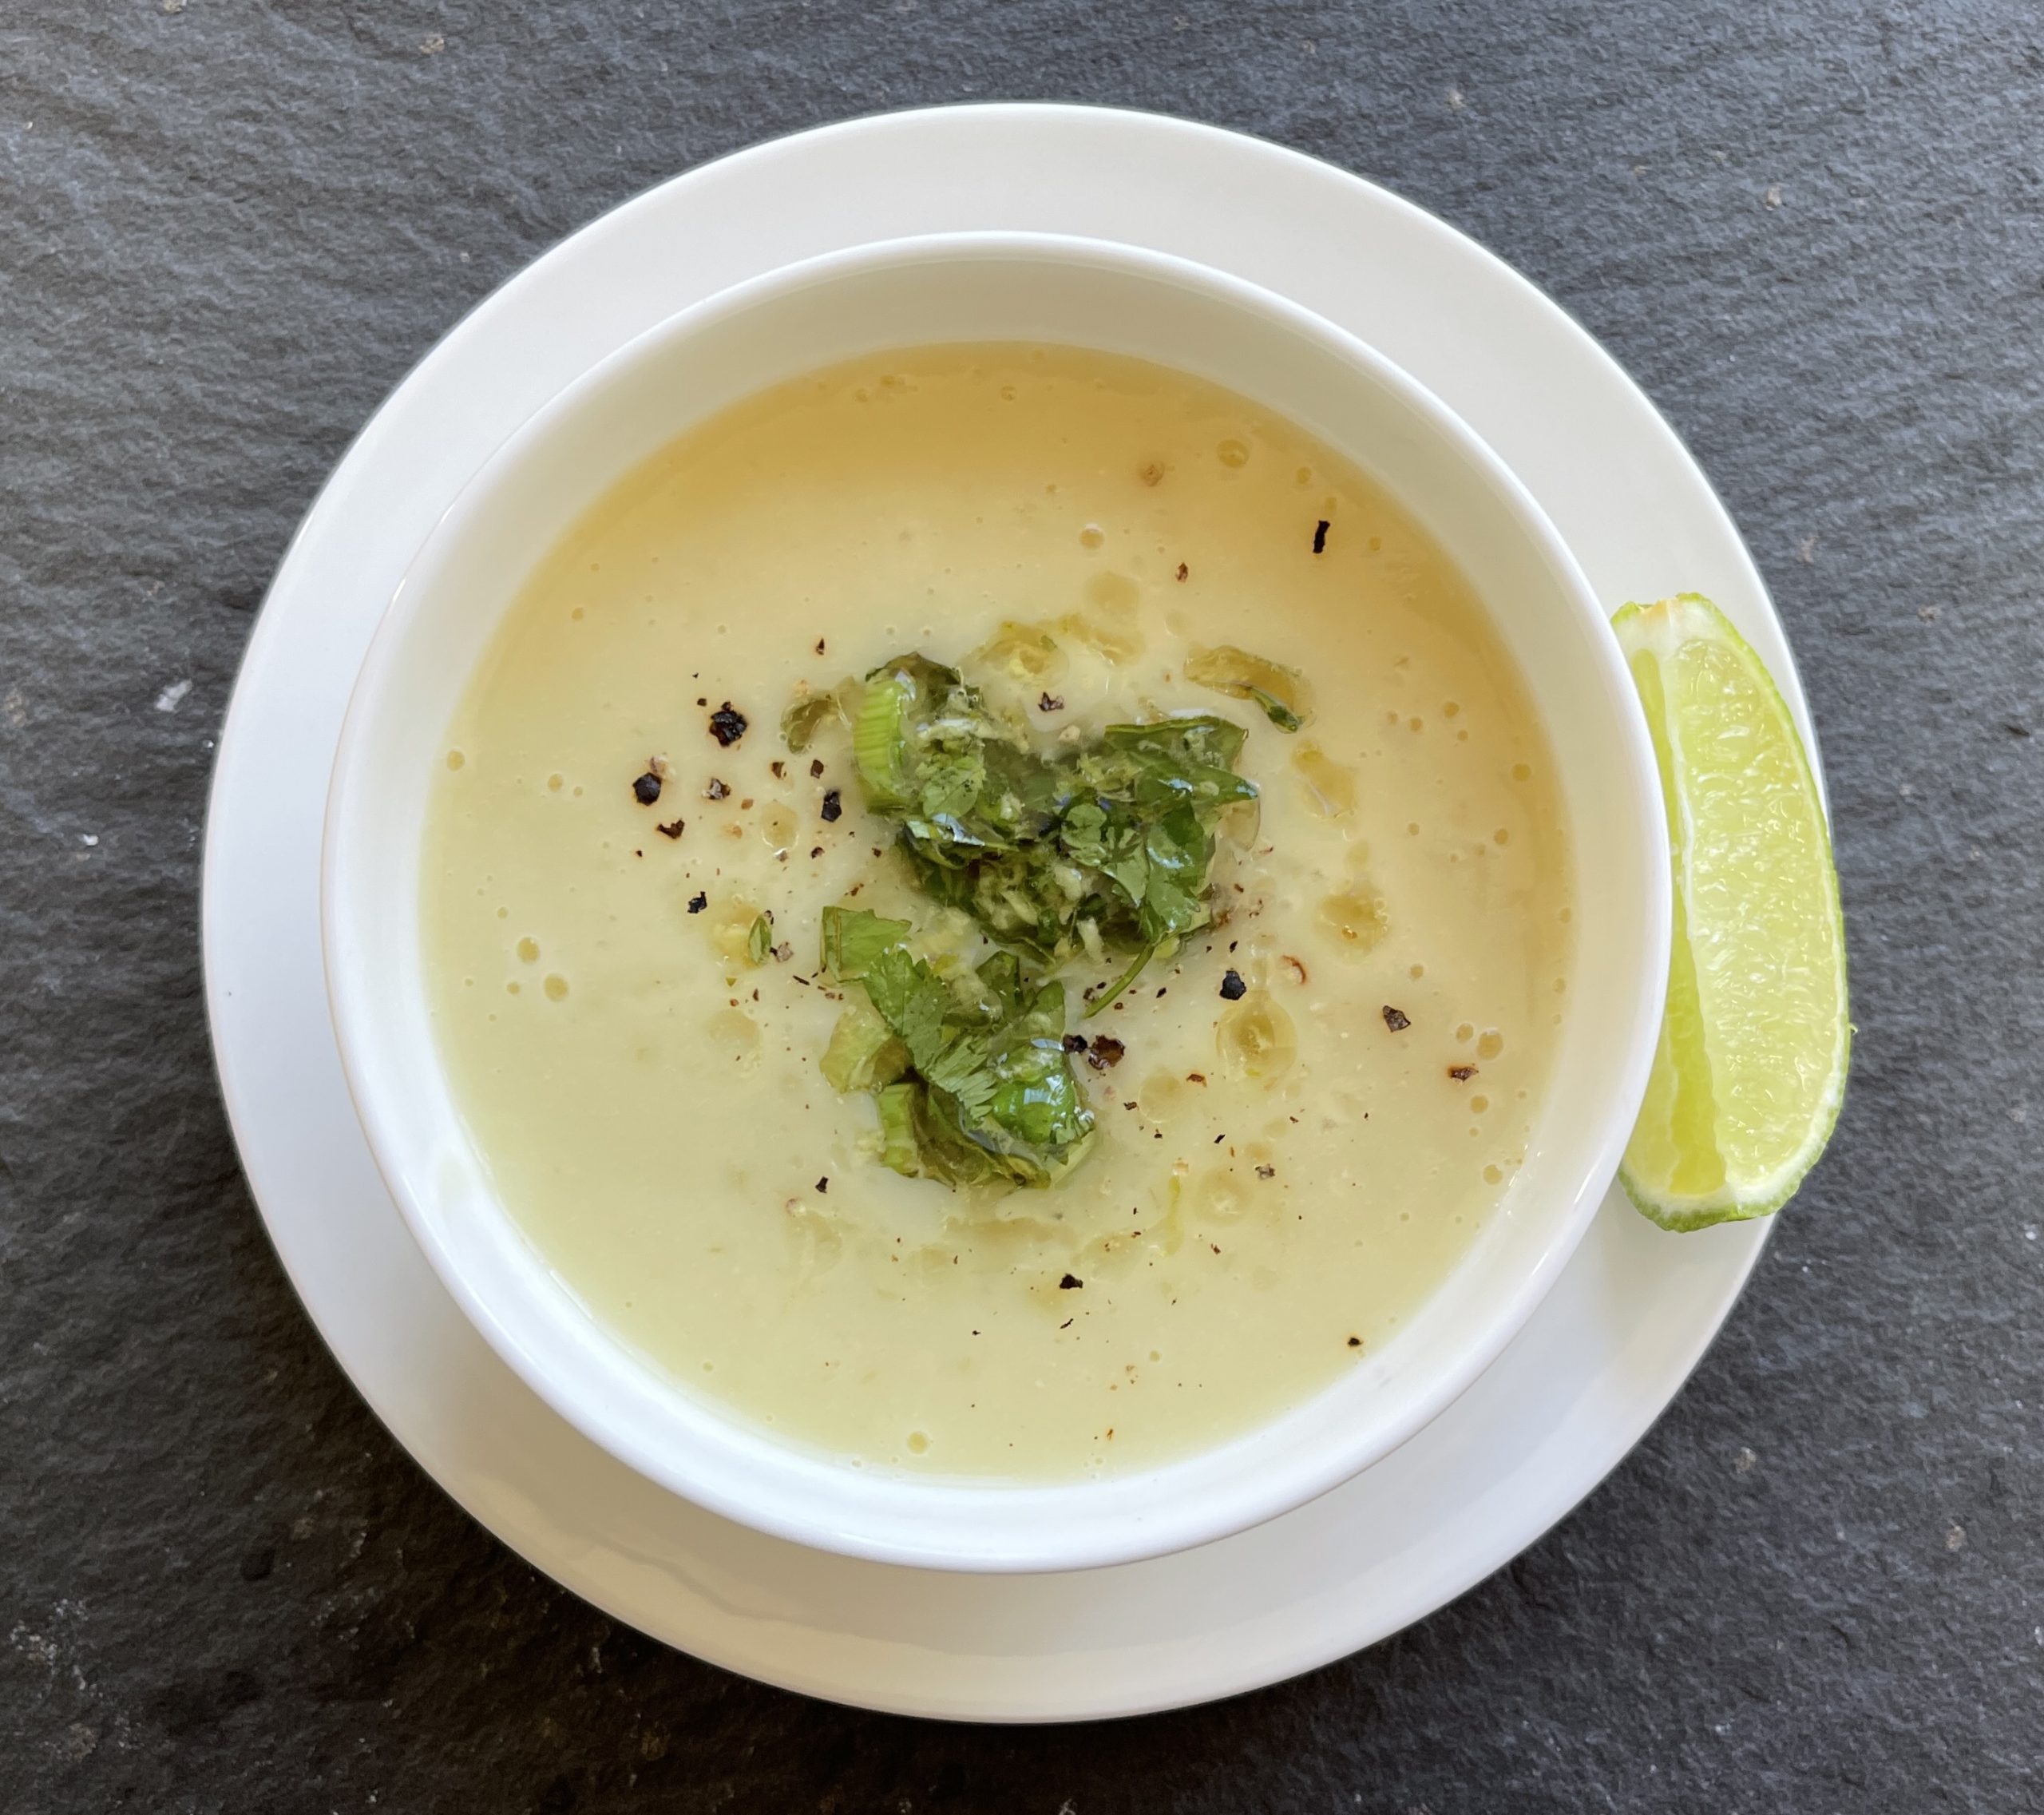 Ginger Cauliflower Soup with an Herb-Lime Relish